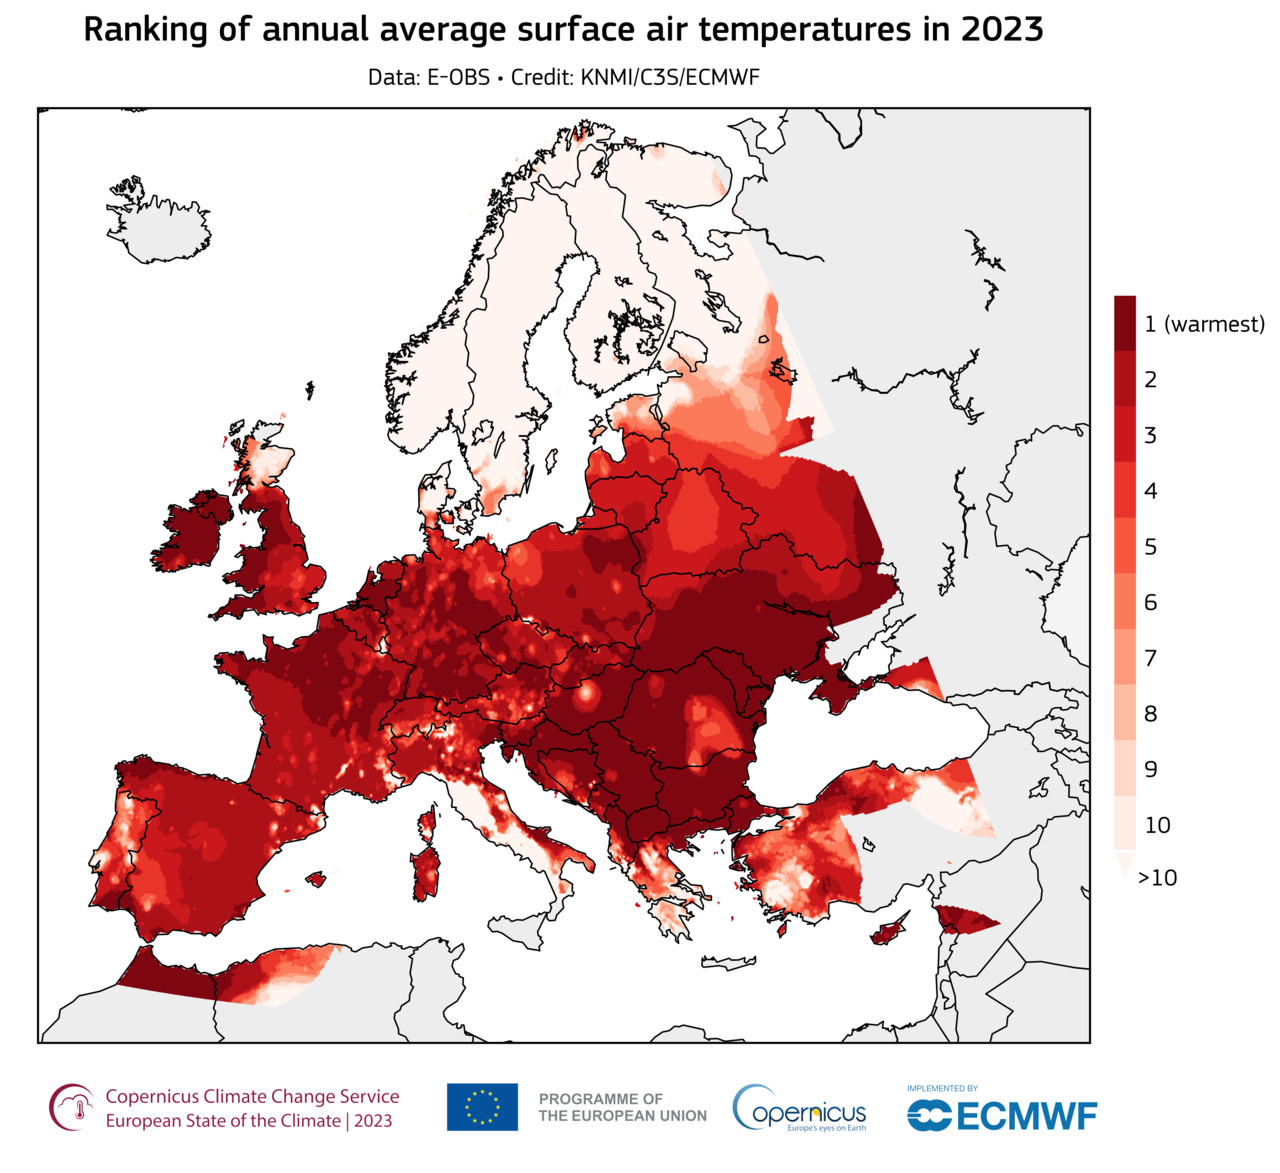 What is happening to Europe’s climate?